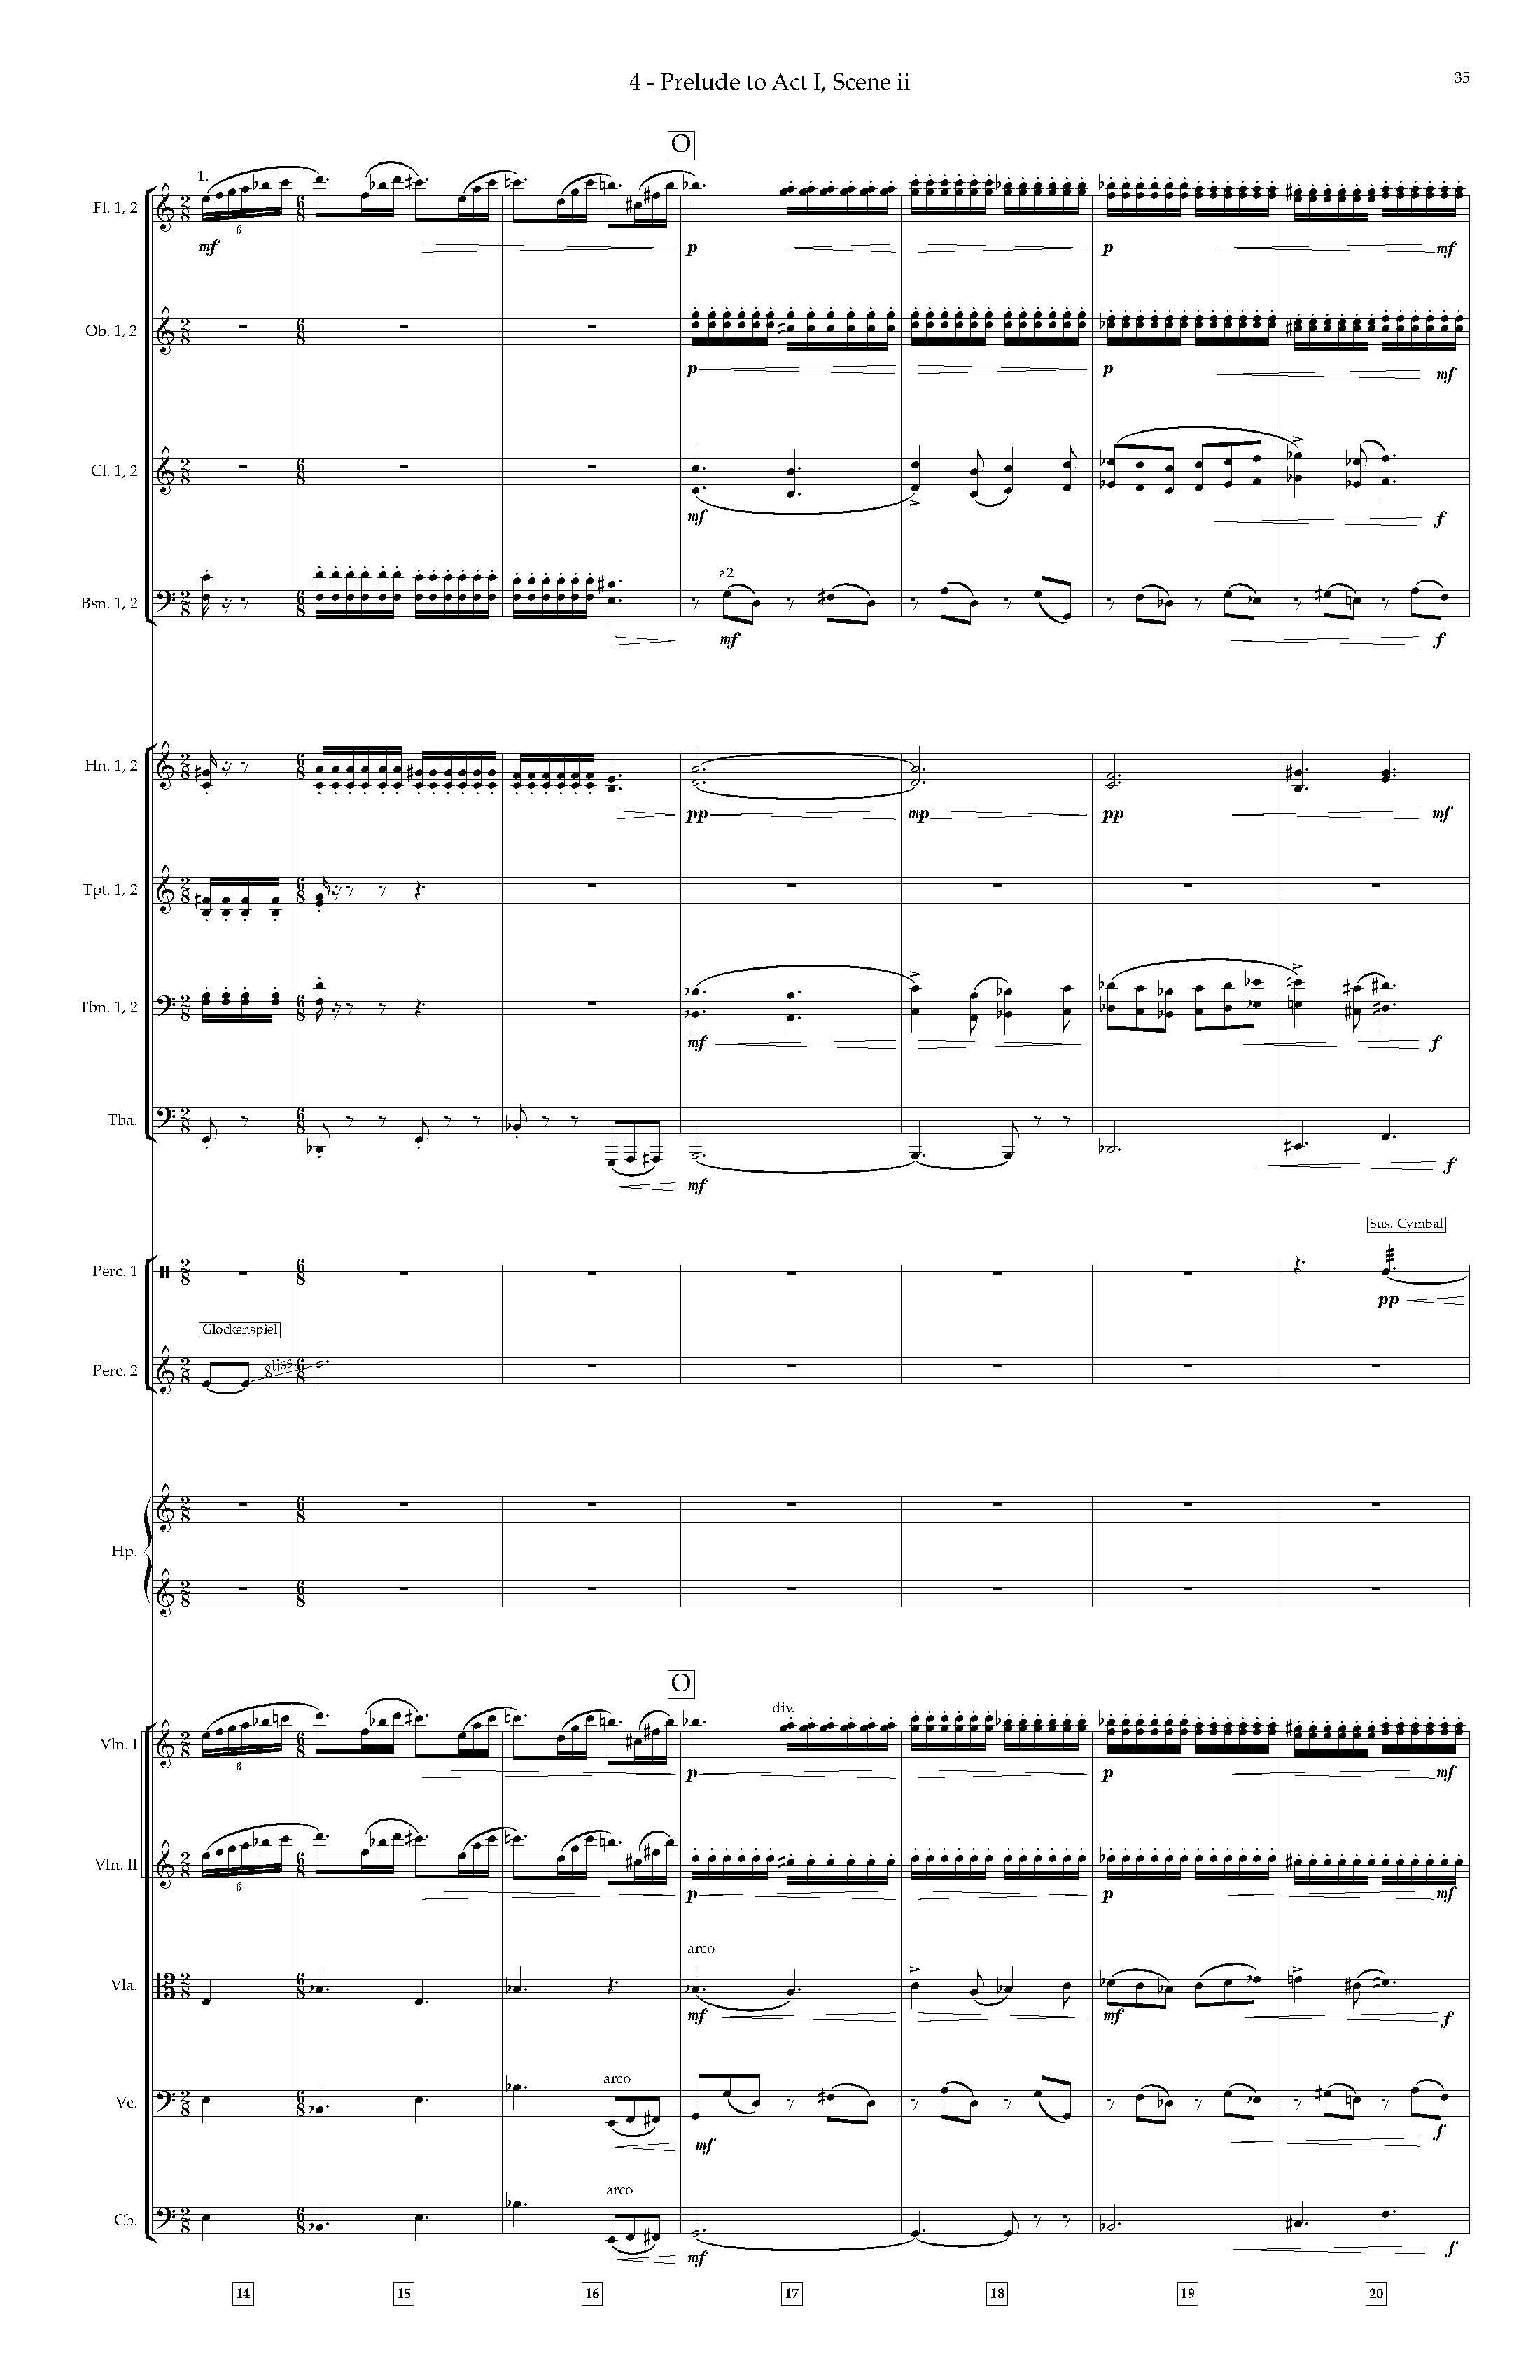 Arias and Interludes from HWGS - Complete Score_Page_41.jpg